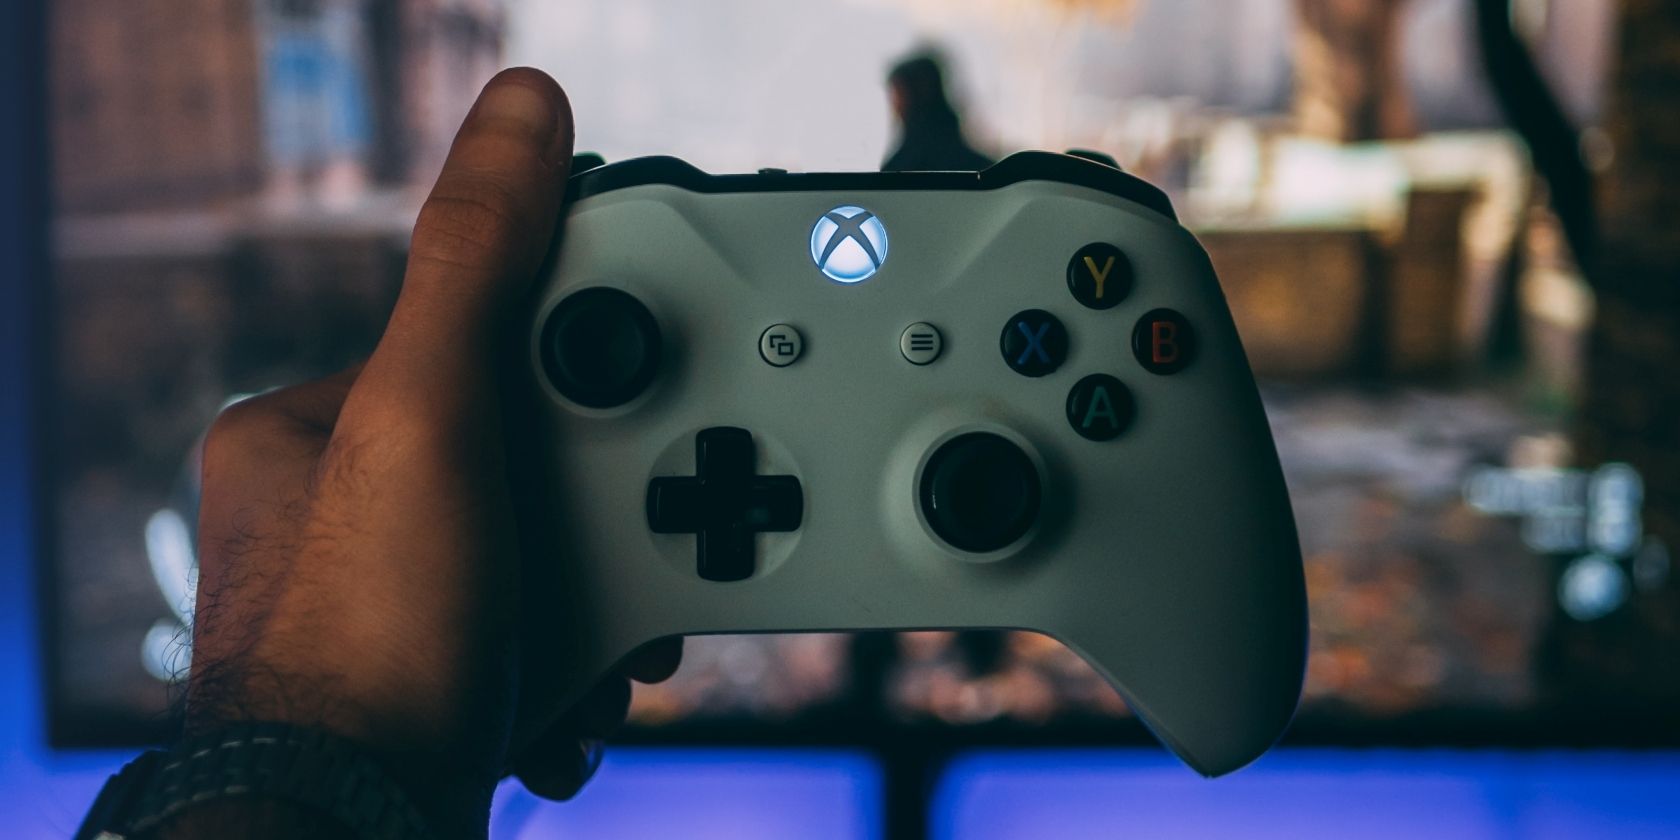 A picture of a man holding up a white Xbox One controller in front of a monitor